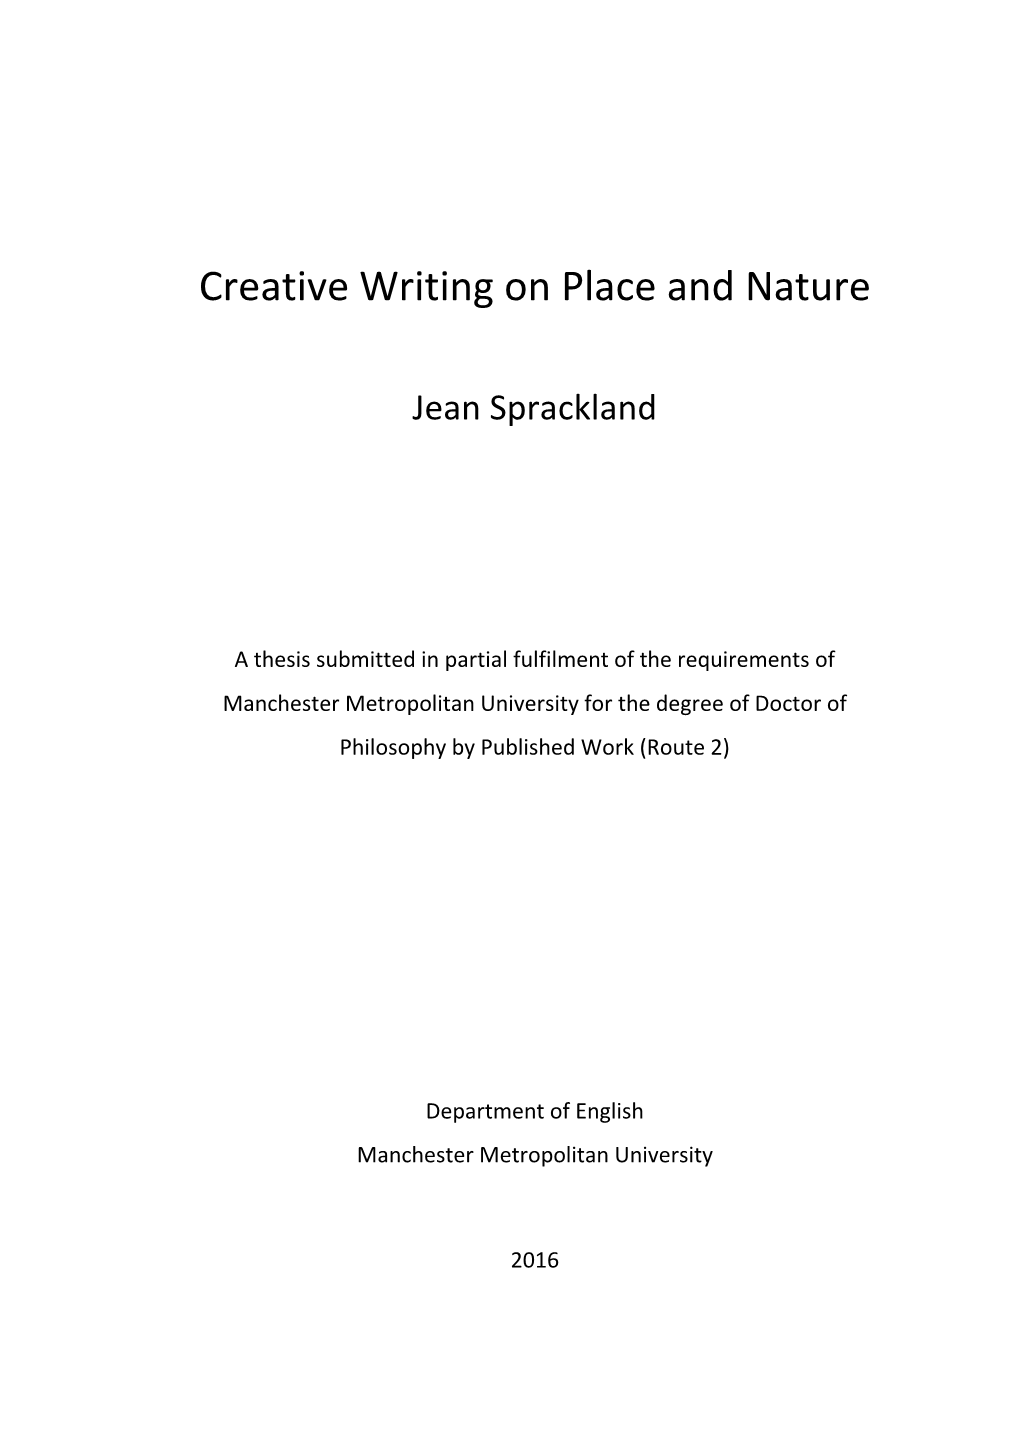 Creative Writing on Place and Nature